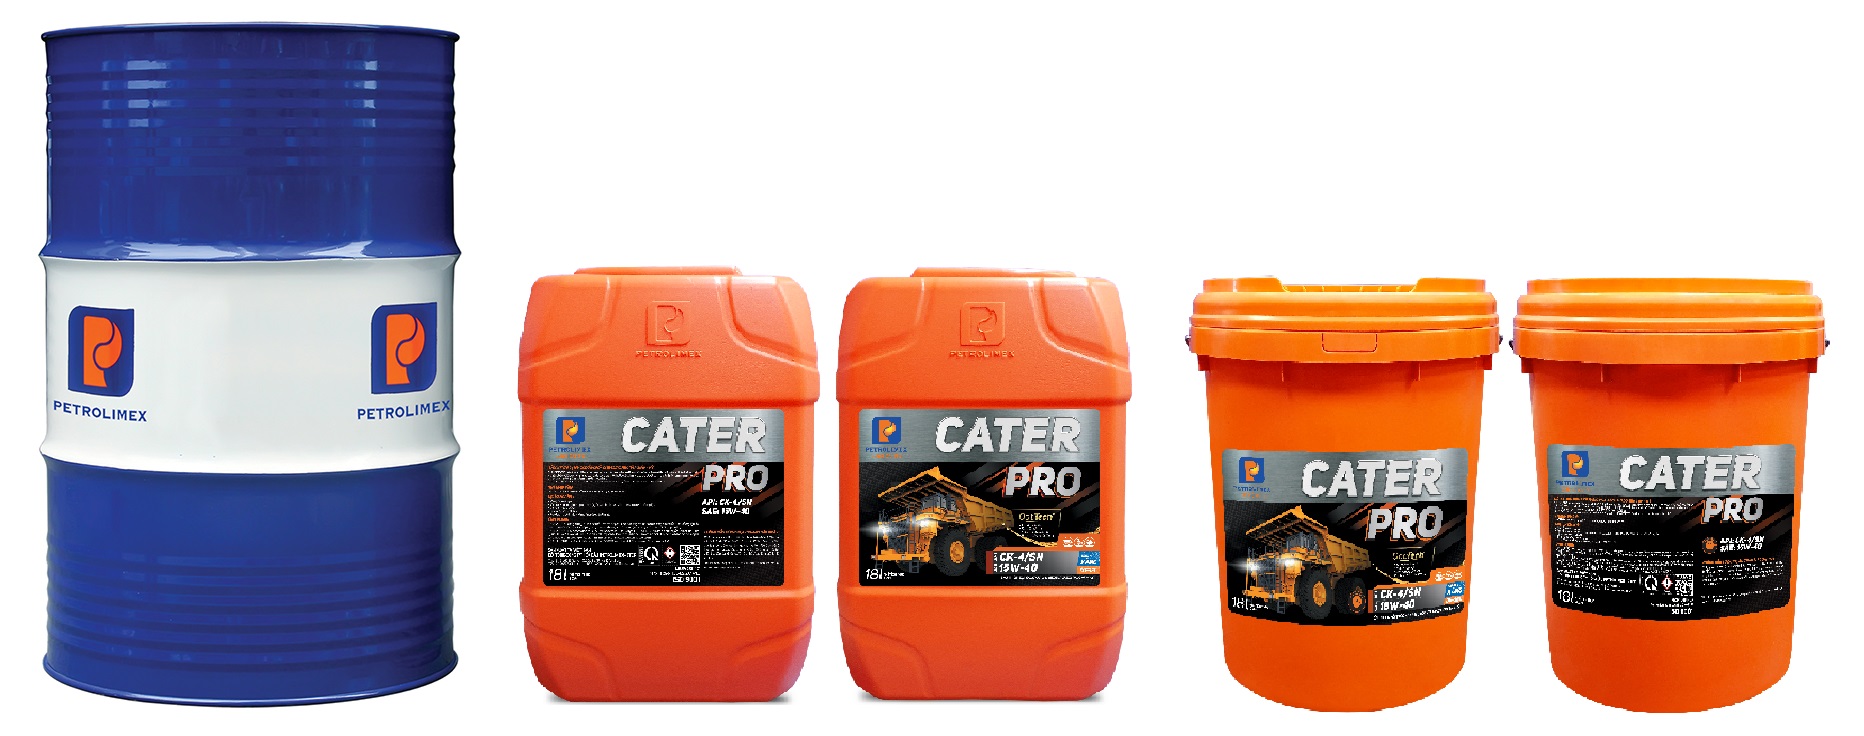 PLC CATER PRO